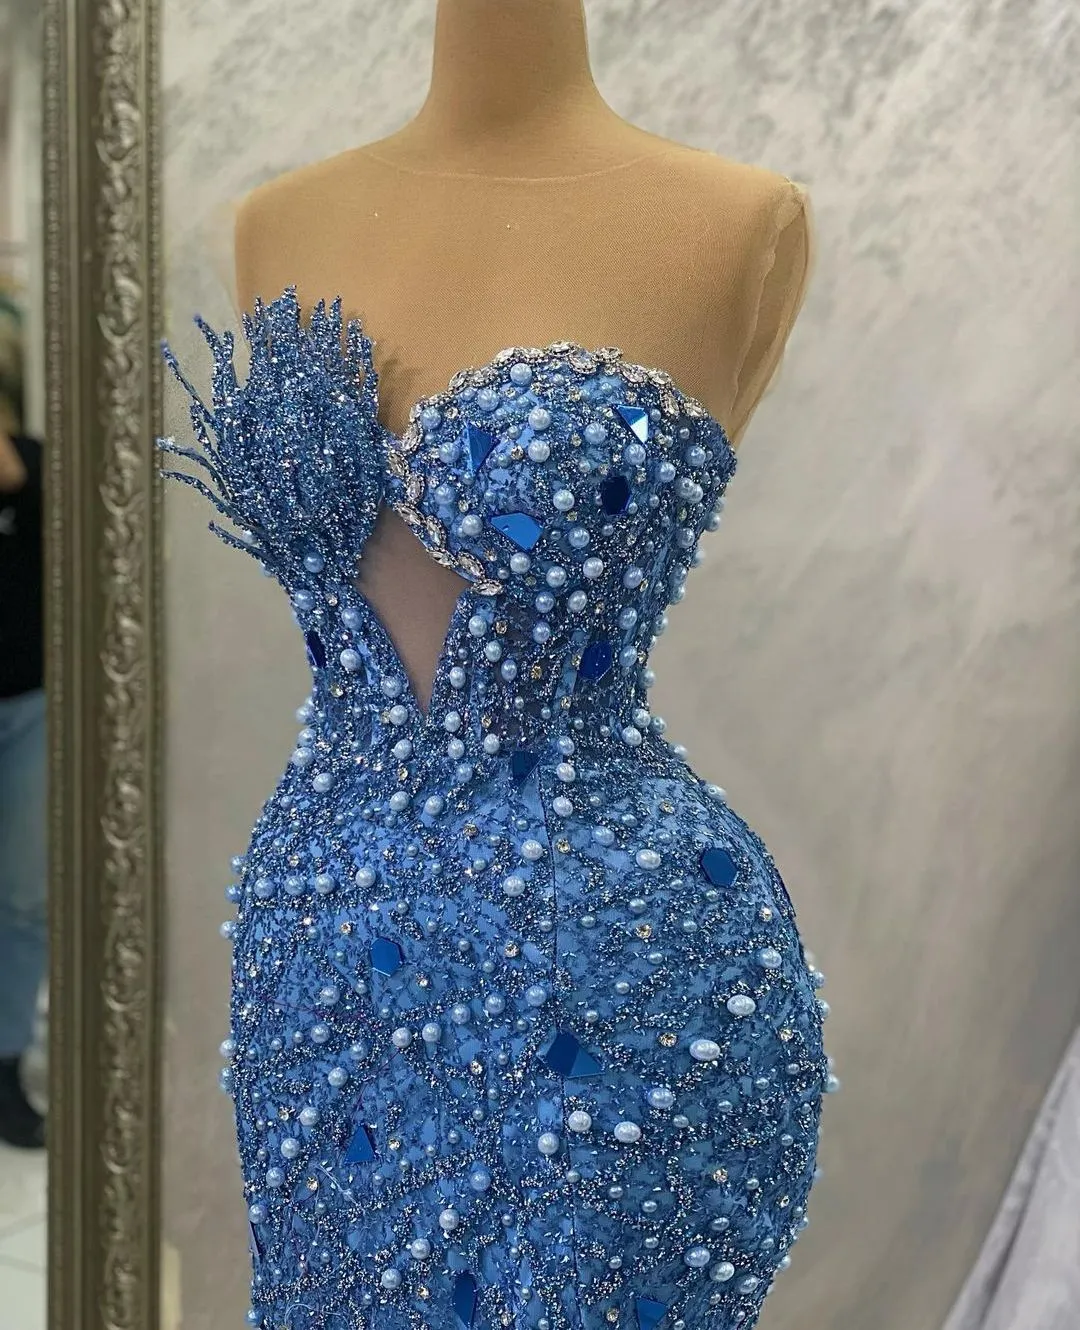 Luxury Mermaid Prom Dresses Sleeveless V Neck Strapless Appliques Sequins Floor Length Celebrity Diamonds Pearls Evening Dress Bridal Gowns Plus Size Custom Made